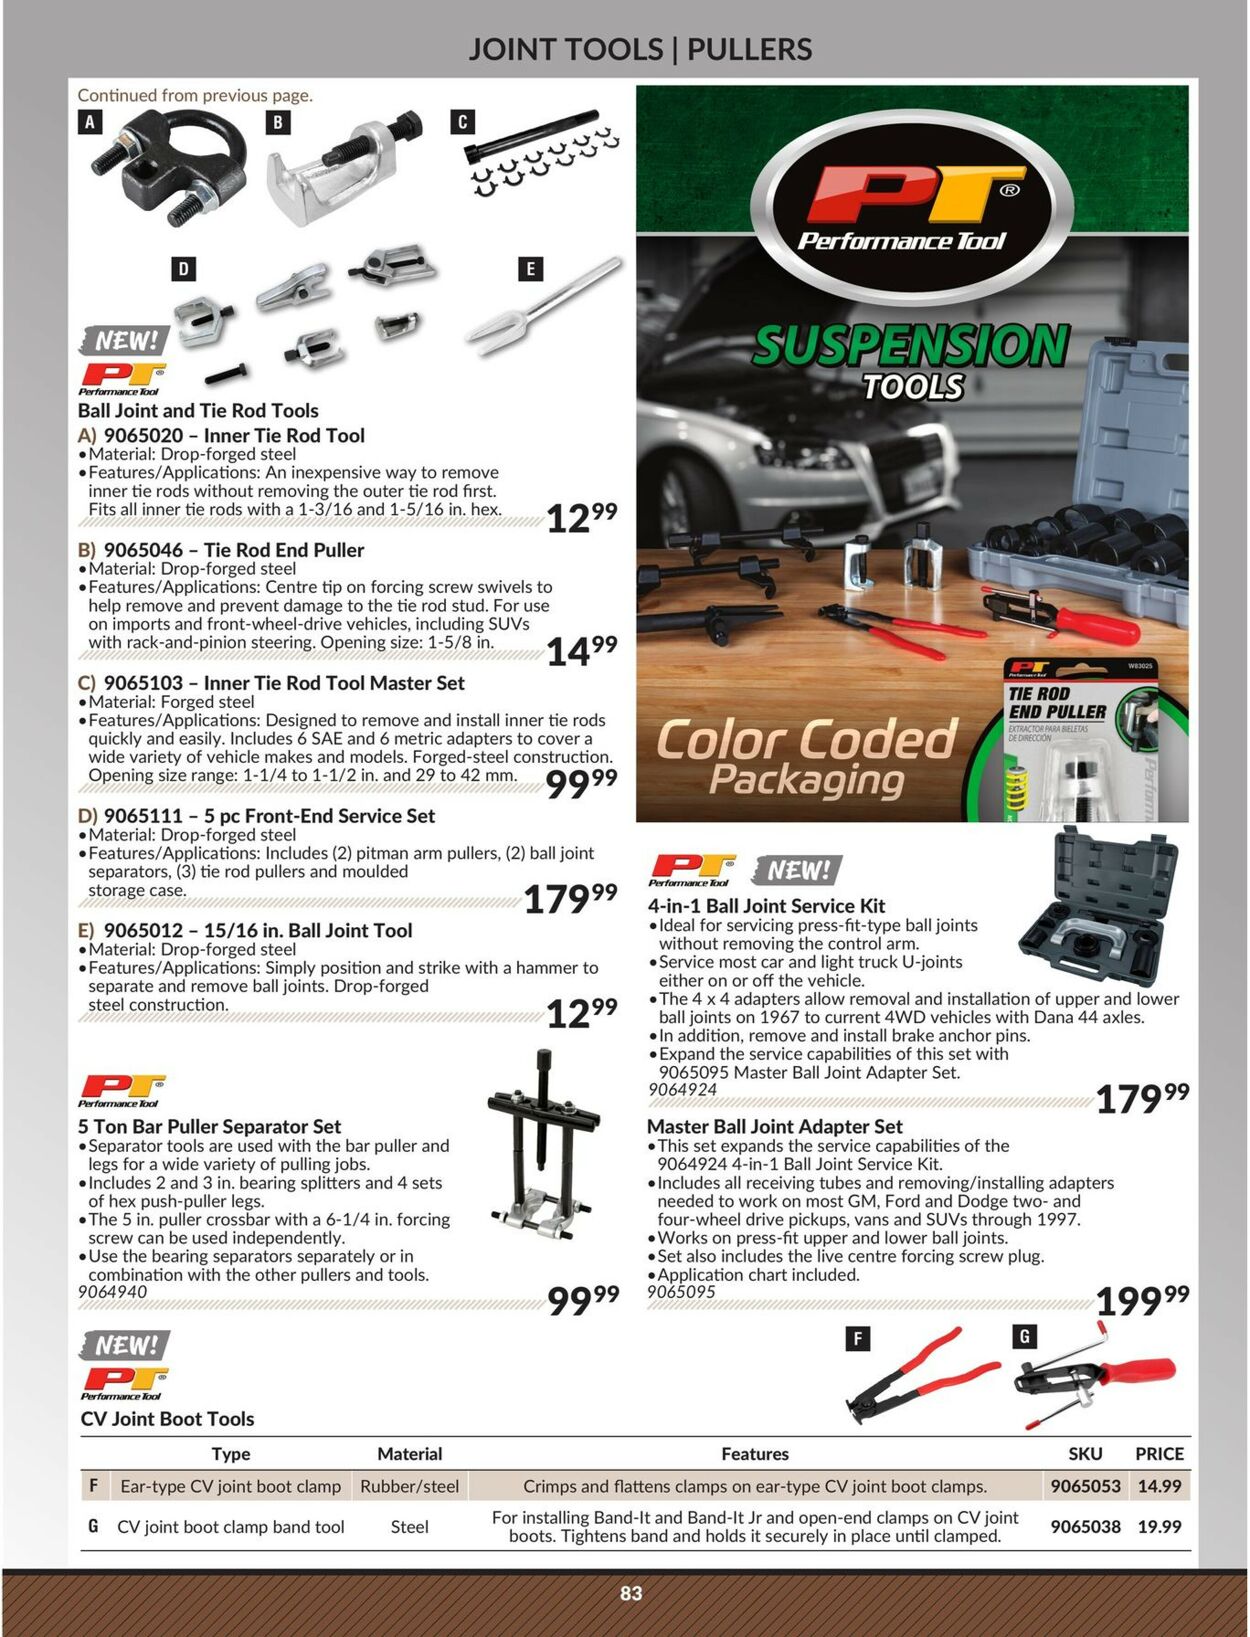 Princess Auto Flyer from 04/25/2023